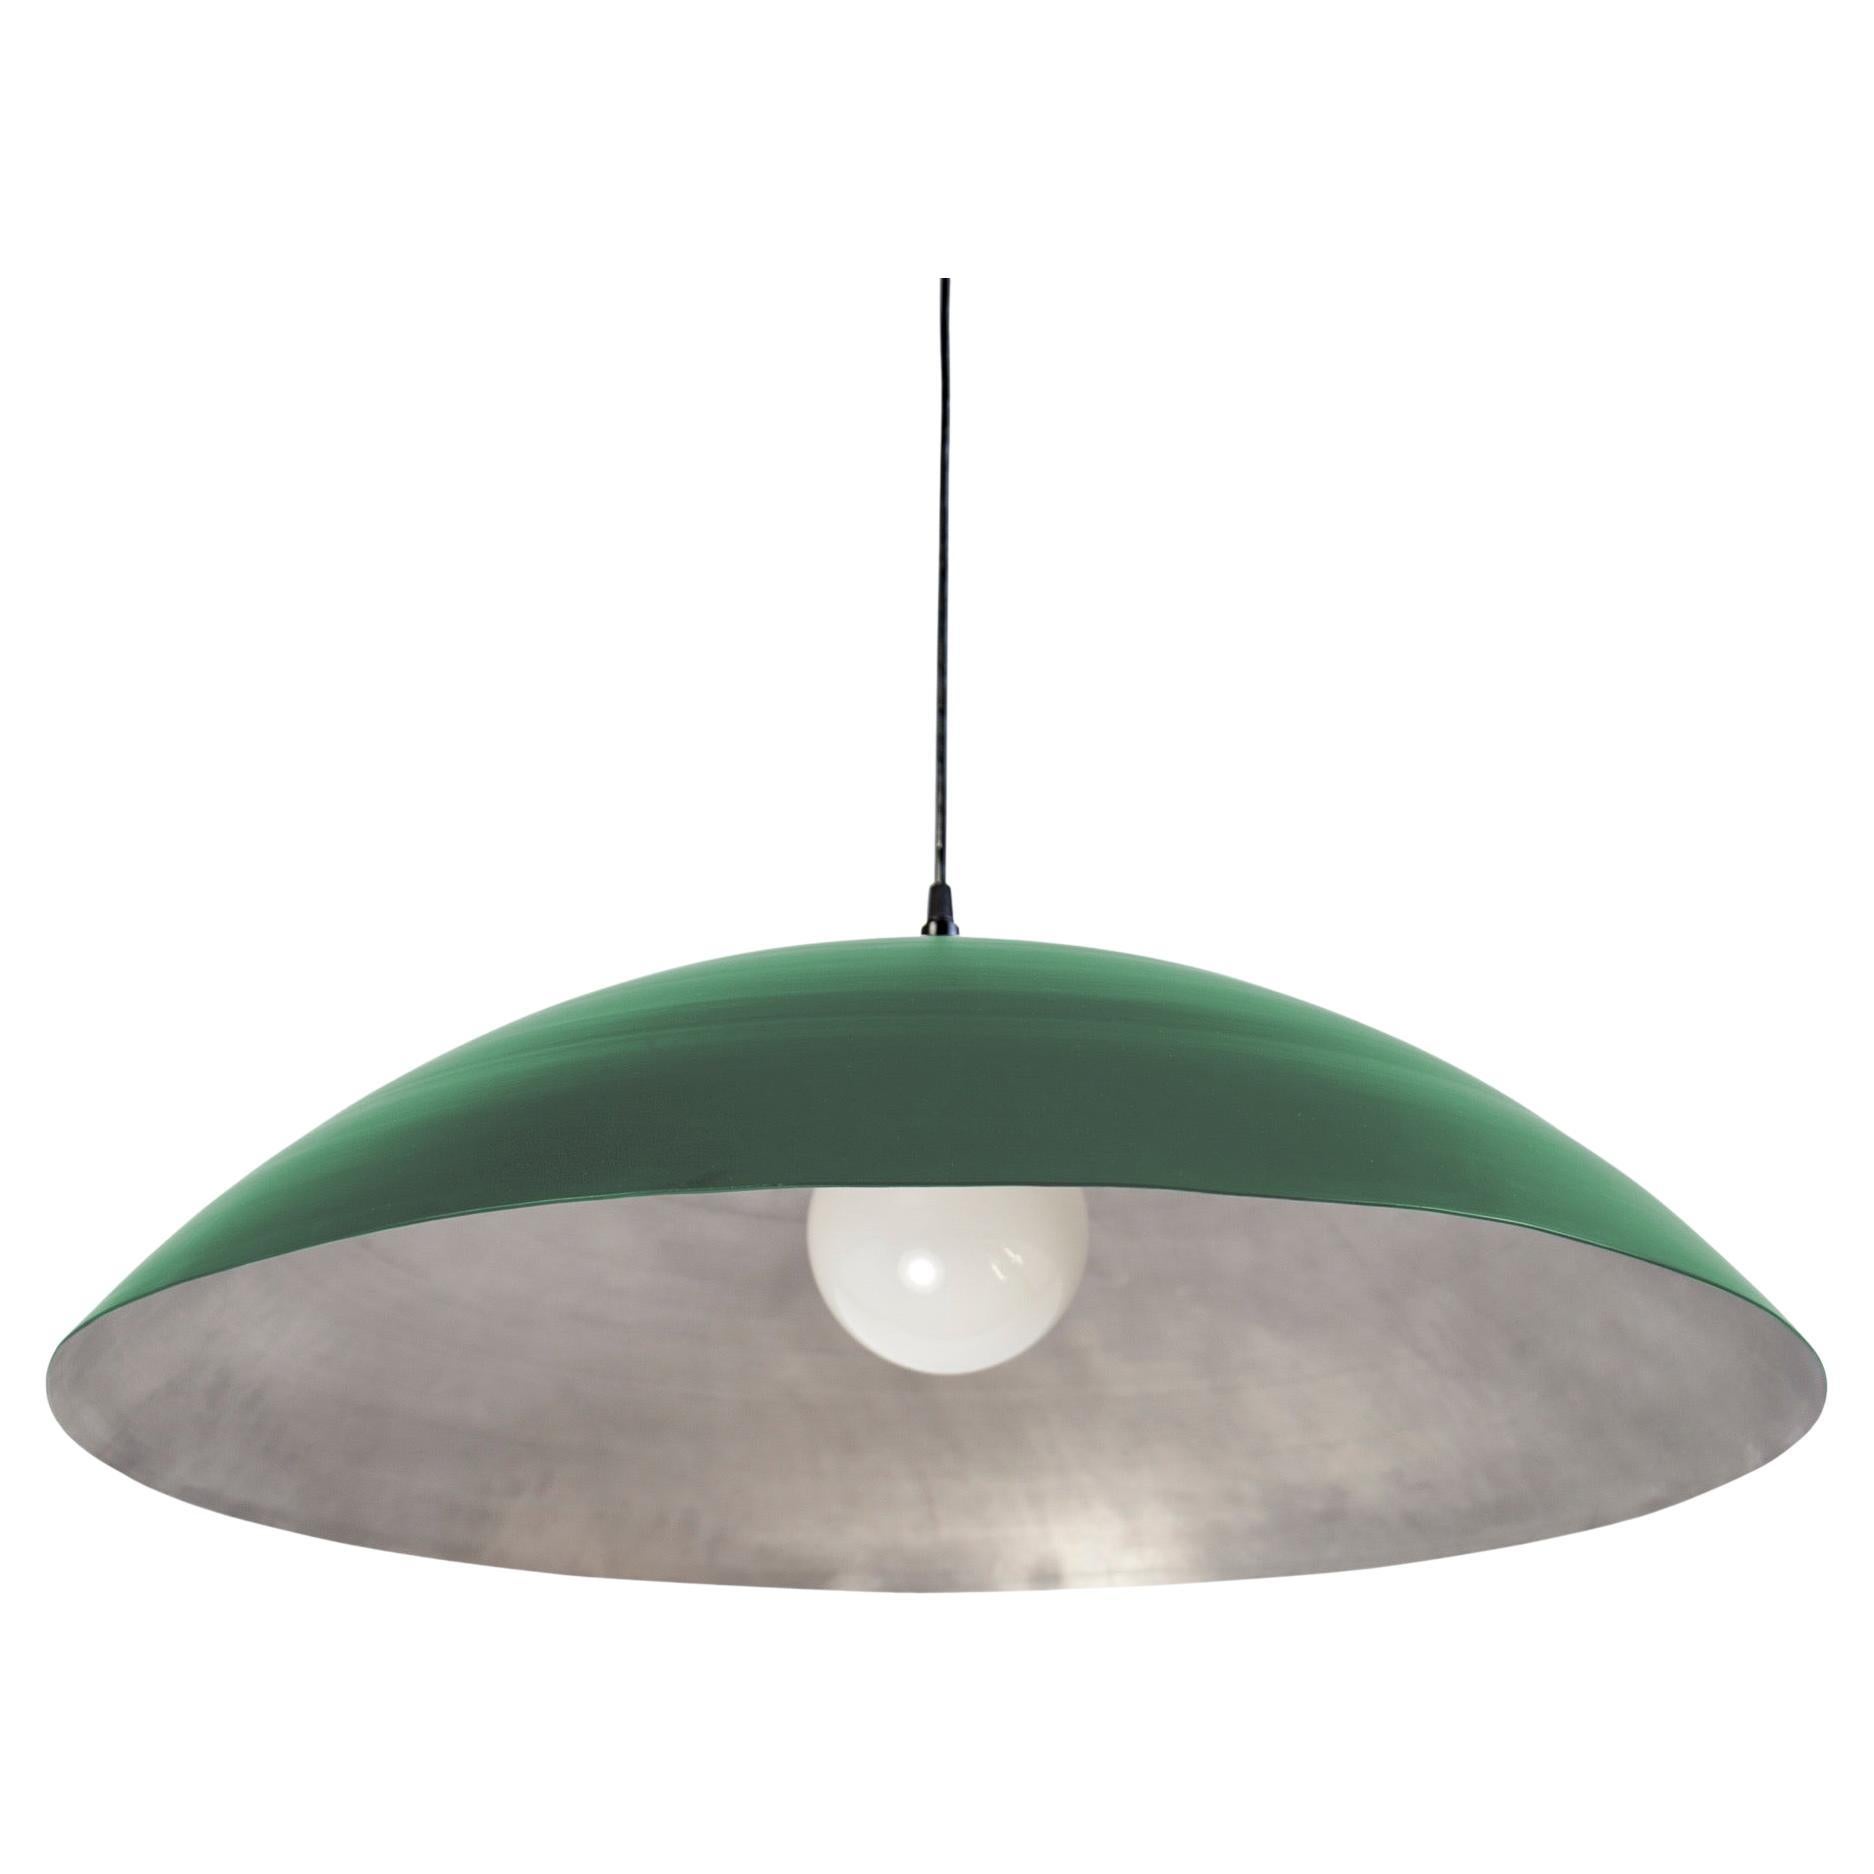 Customizable Oversized Pendant by RESEARCH Lighting, Vine Green & Silver, MTO